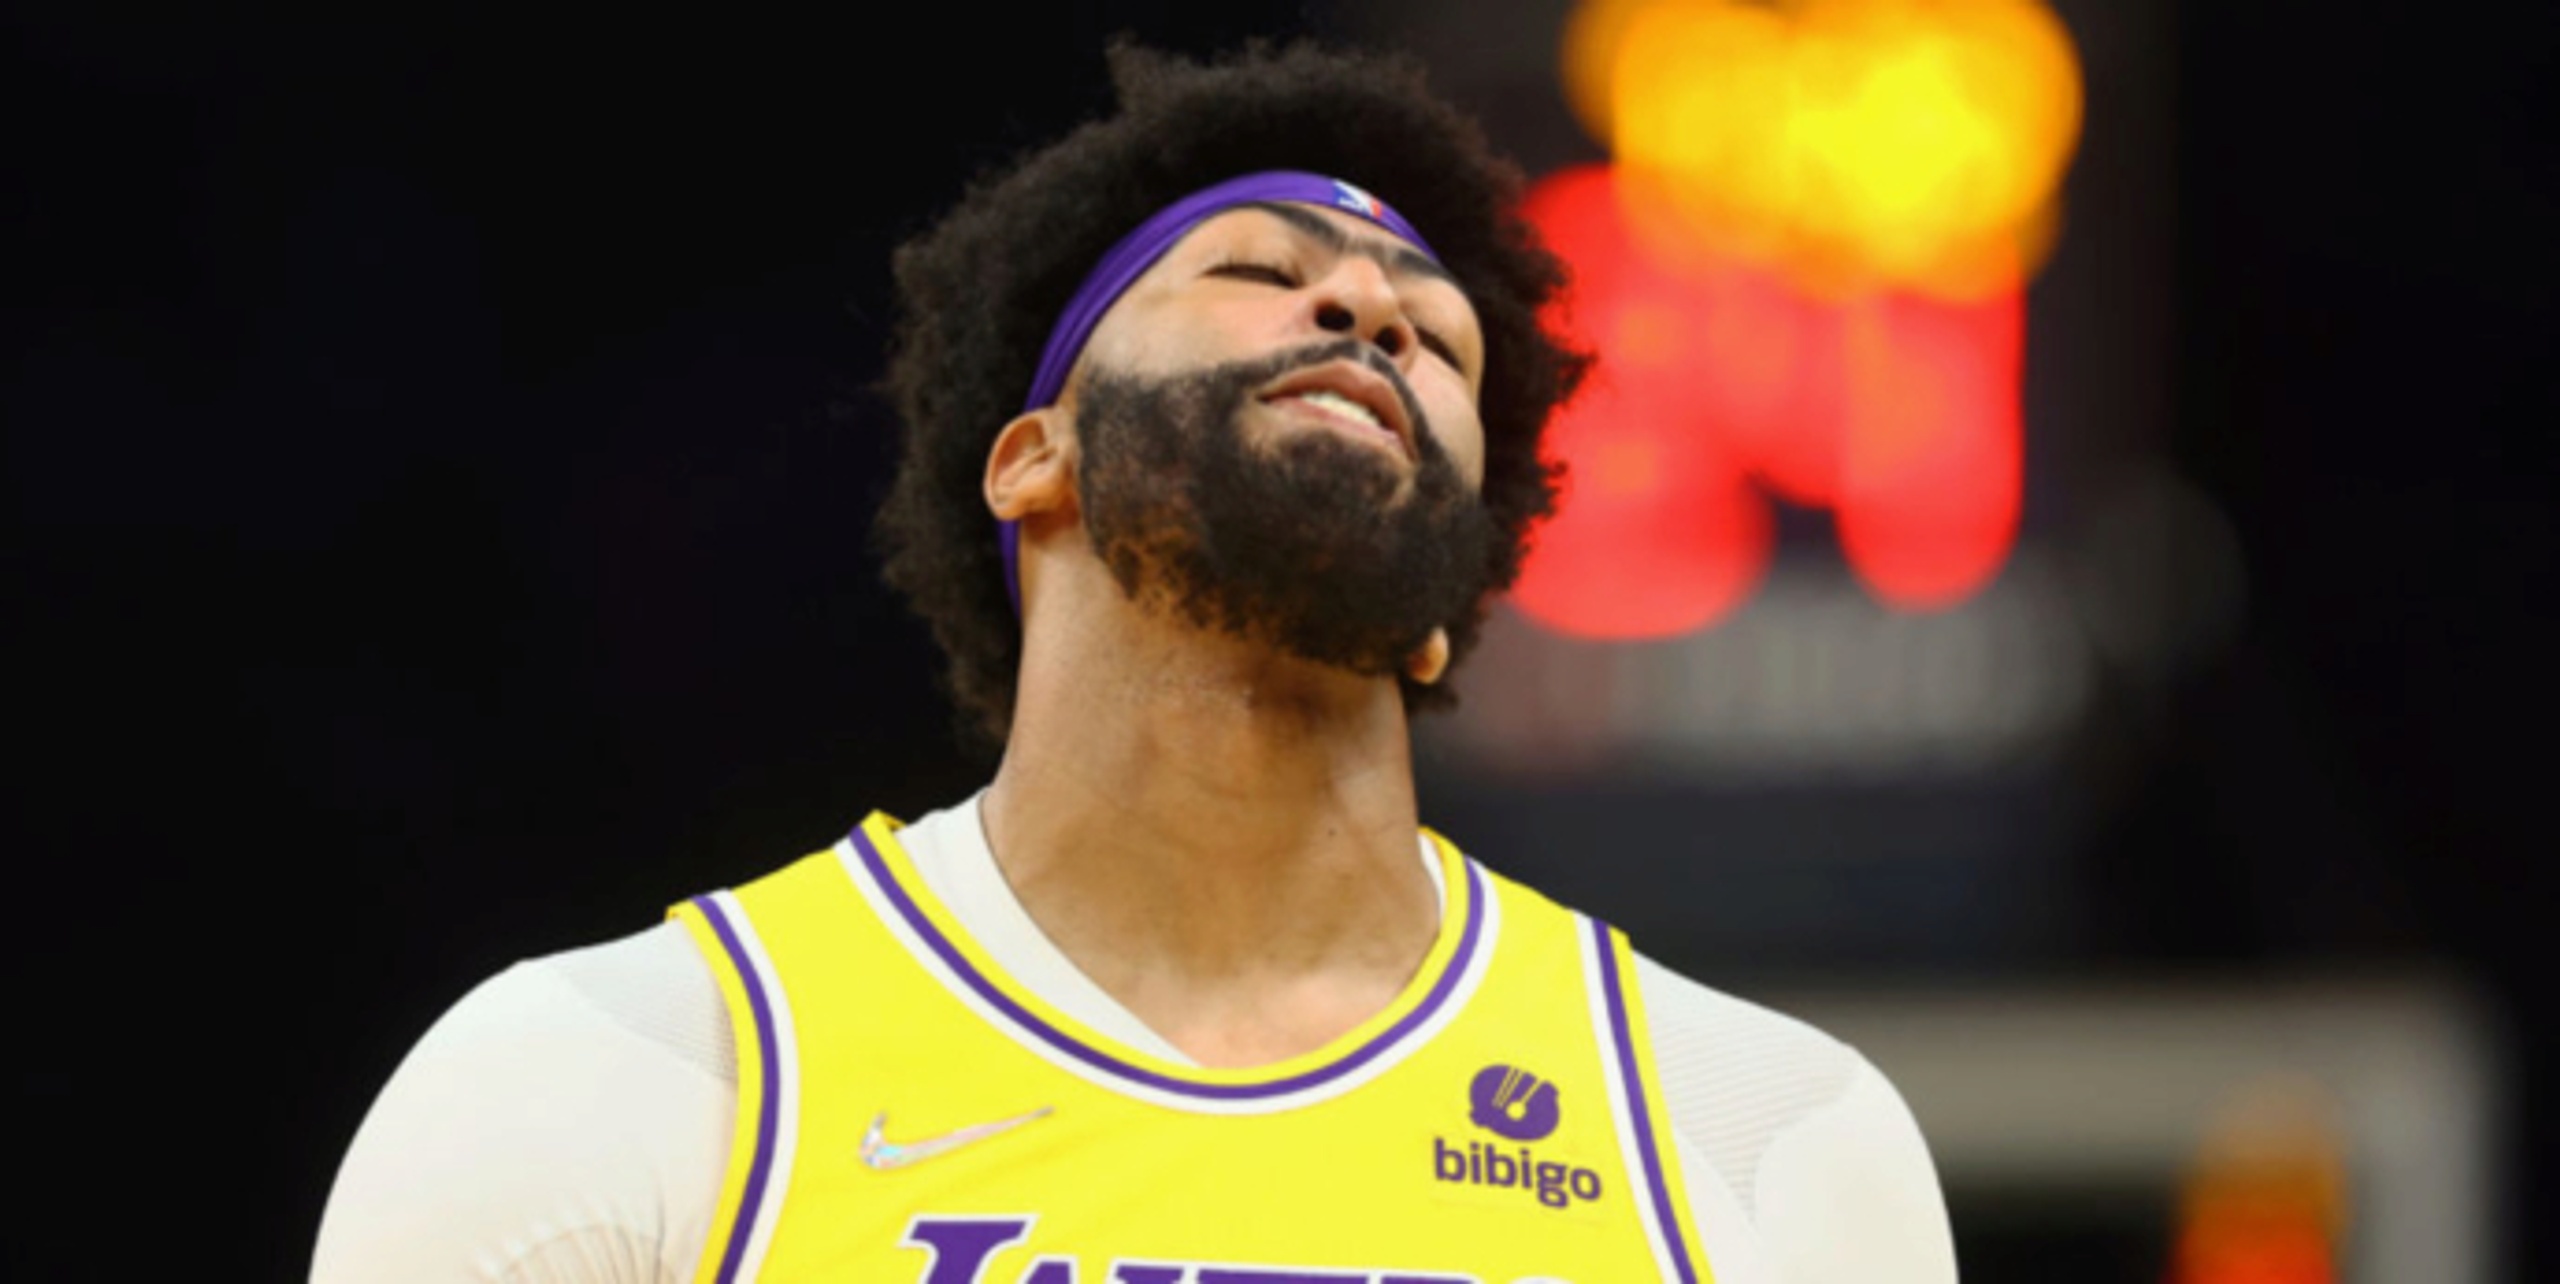 Lakers announcer asked Suns to 'put us out of our misery'